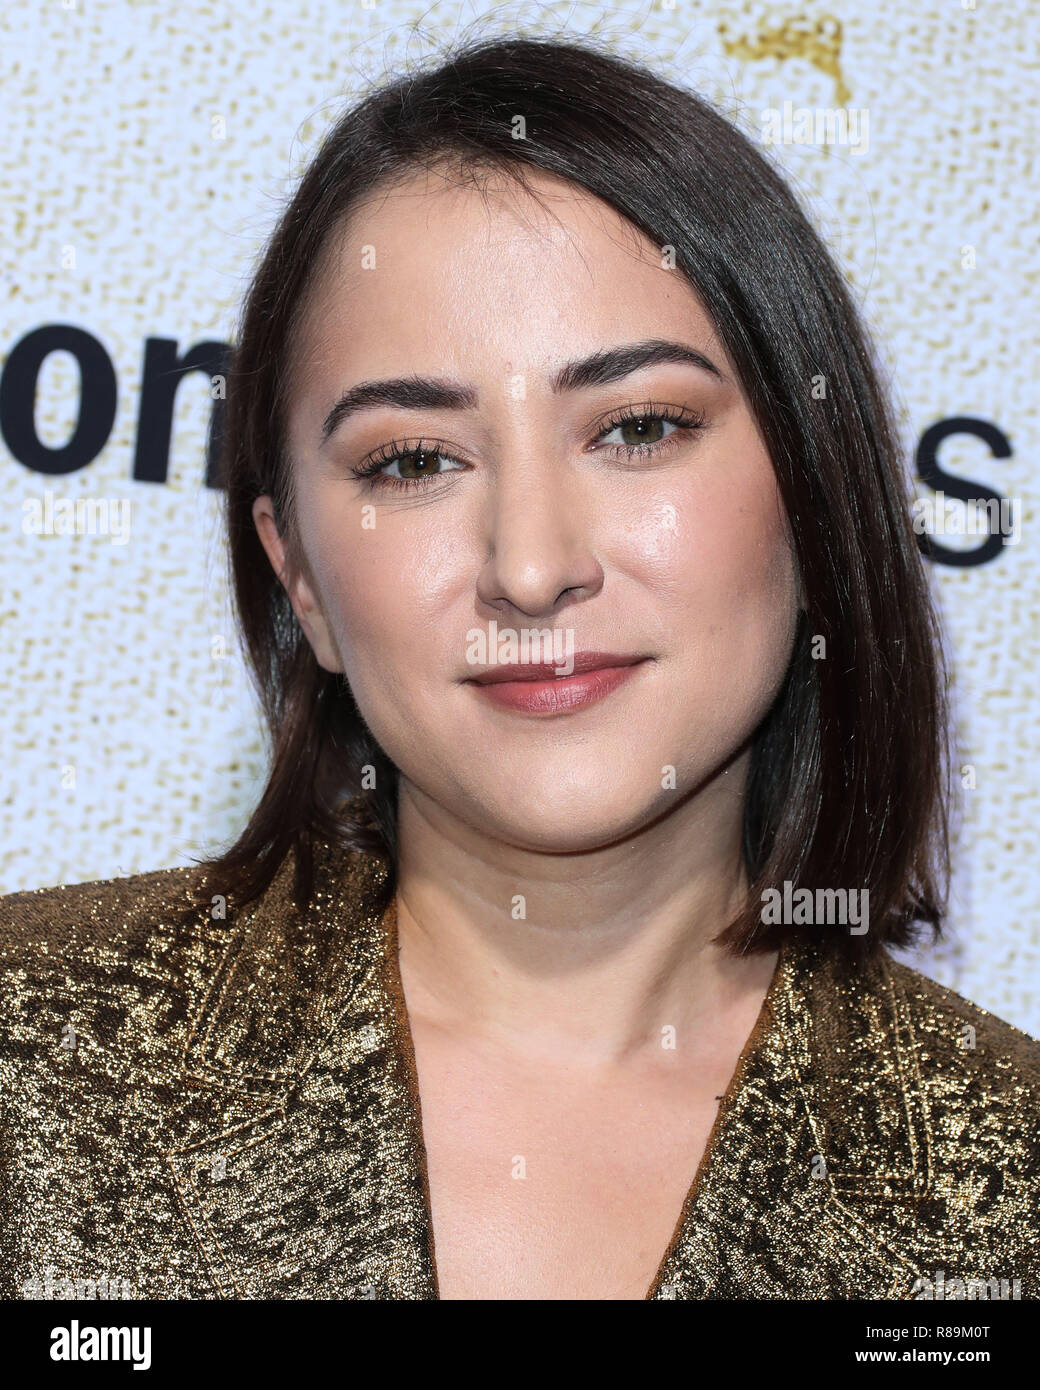 HOLLYWOOD, LOS ANGELES, CA, USA - OCTOBER 24: Zelda Williams at the Los Angeles Premiere Of Amazon Studio's 'Suspiria' held at the ArcLight Cinerama Dome on October 24, 2018 in Hollywood, Los Angeles, California, United States. (Photo by Xavier Collin/Image Press Agency) Stock Photo